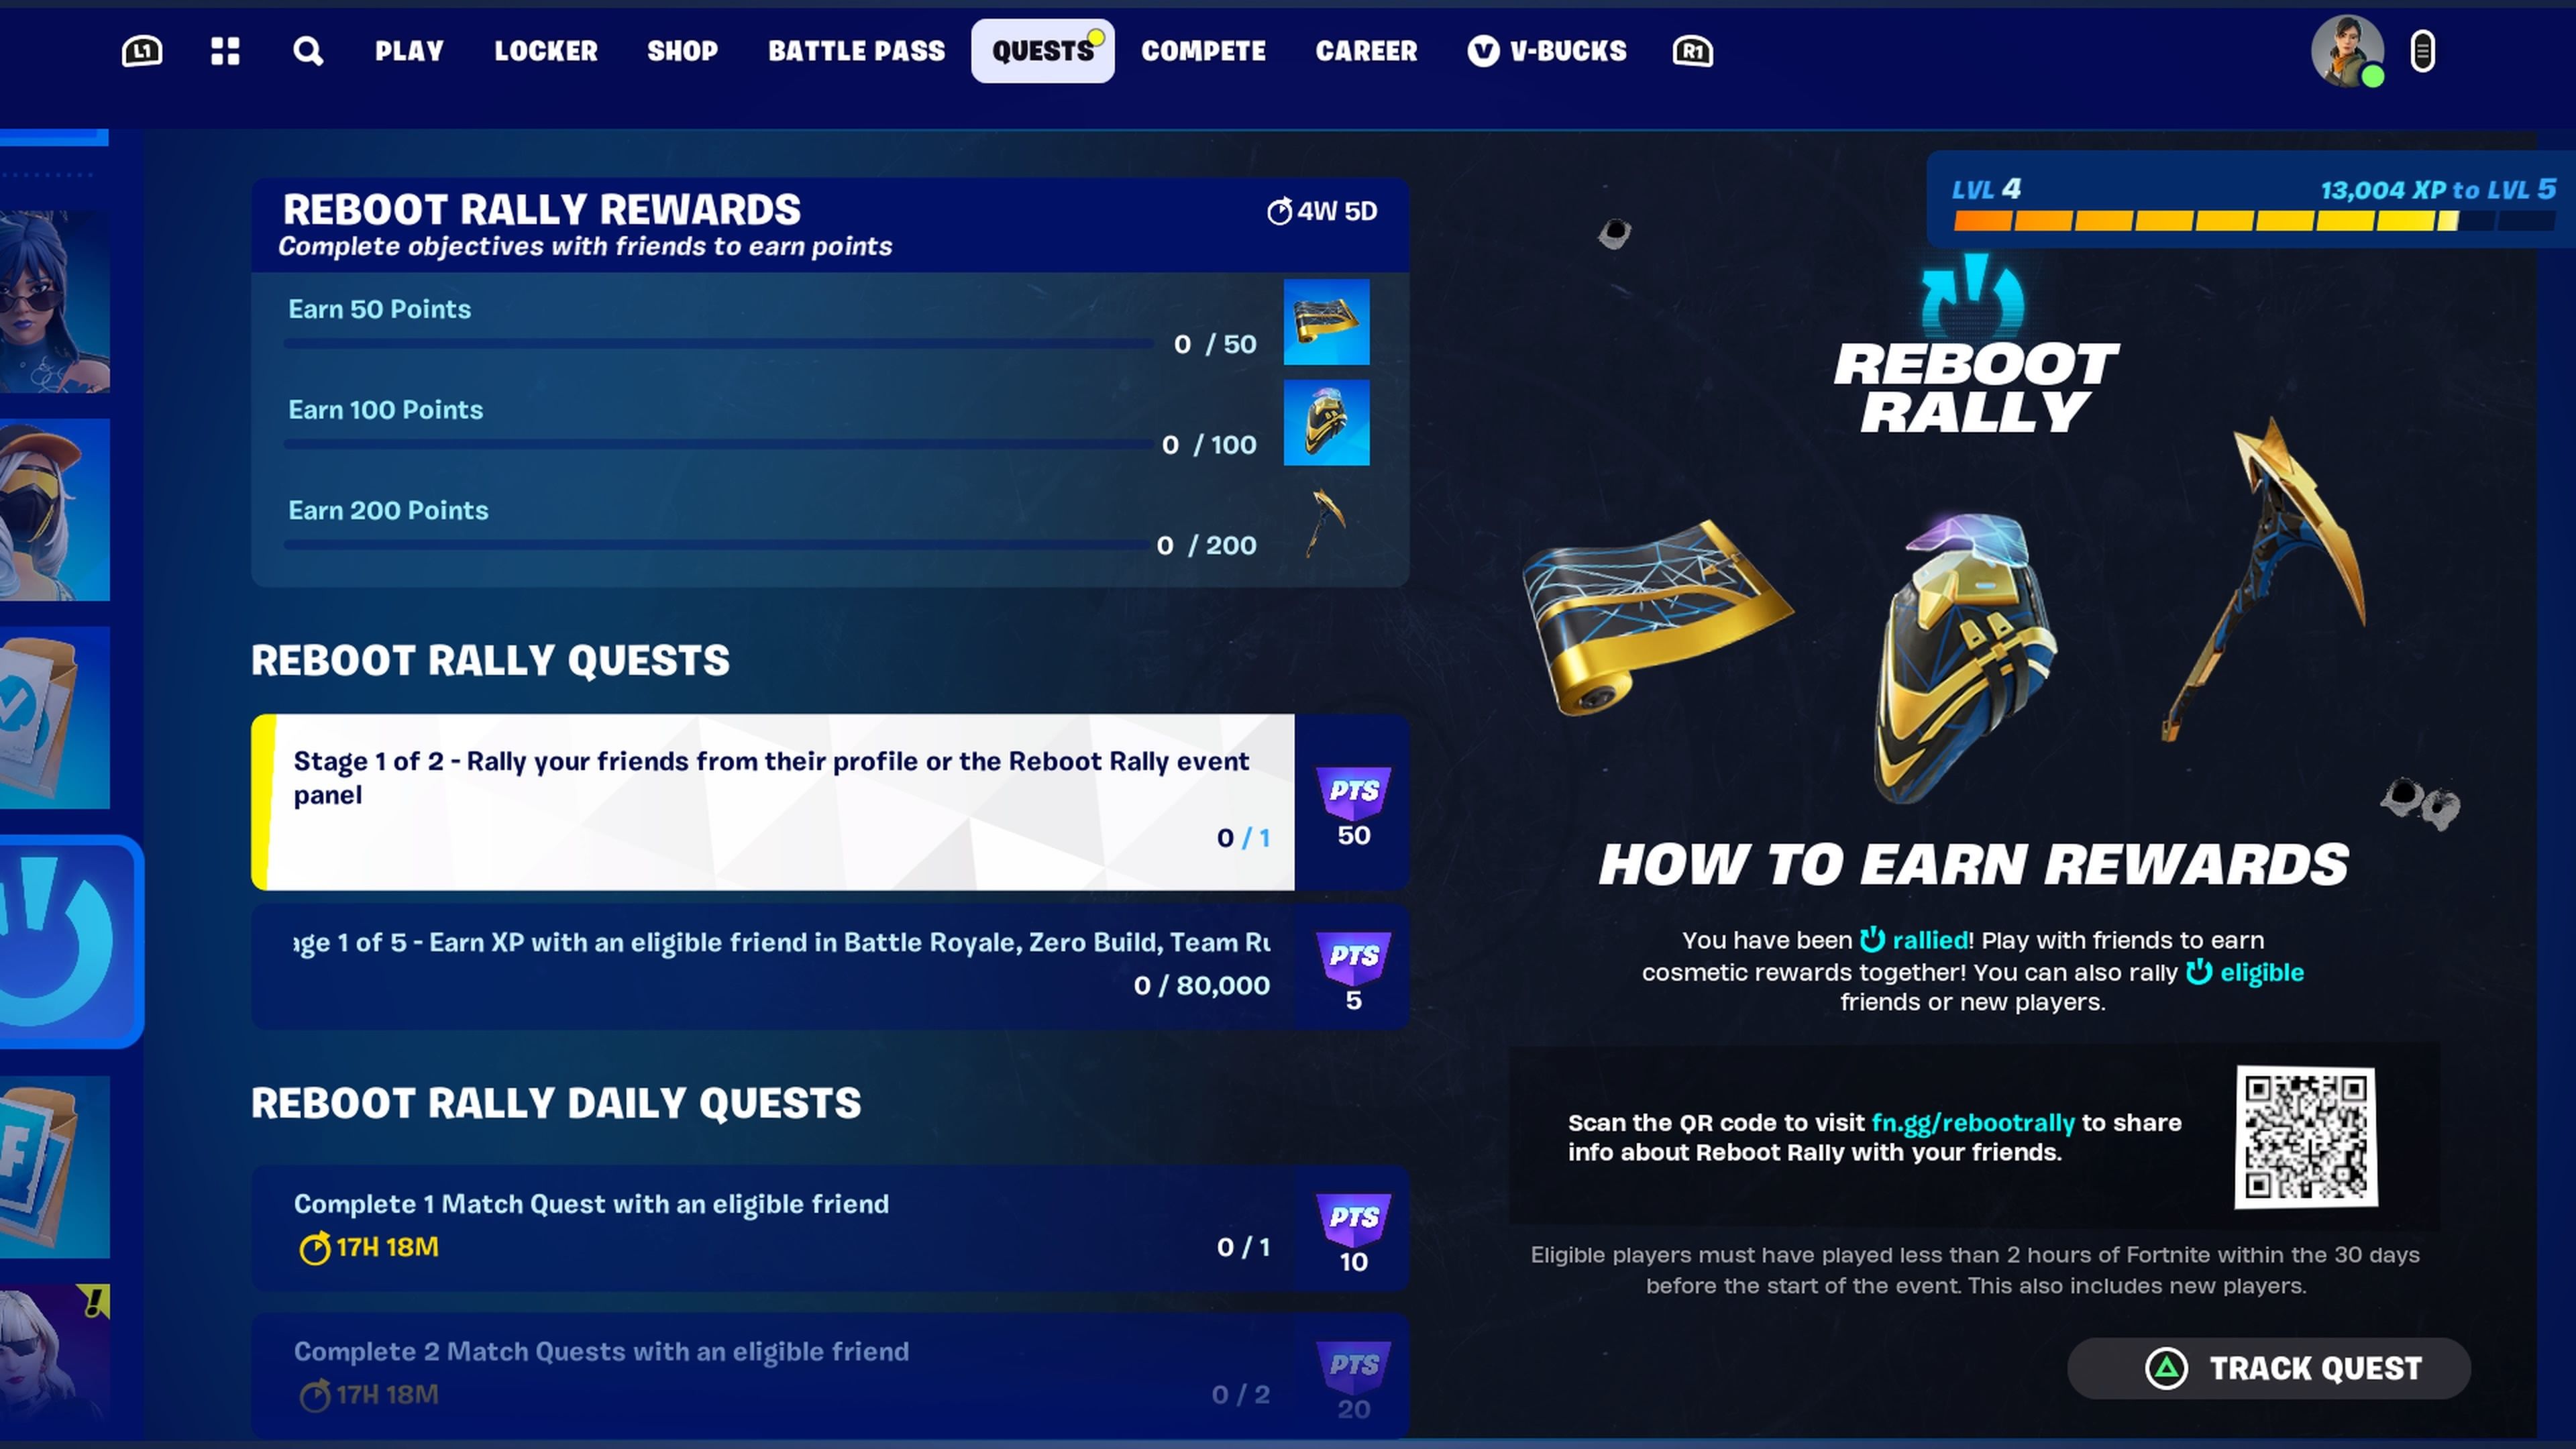 The Reboot Rally rewards and quest menu in the Lobby of Fortnite.